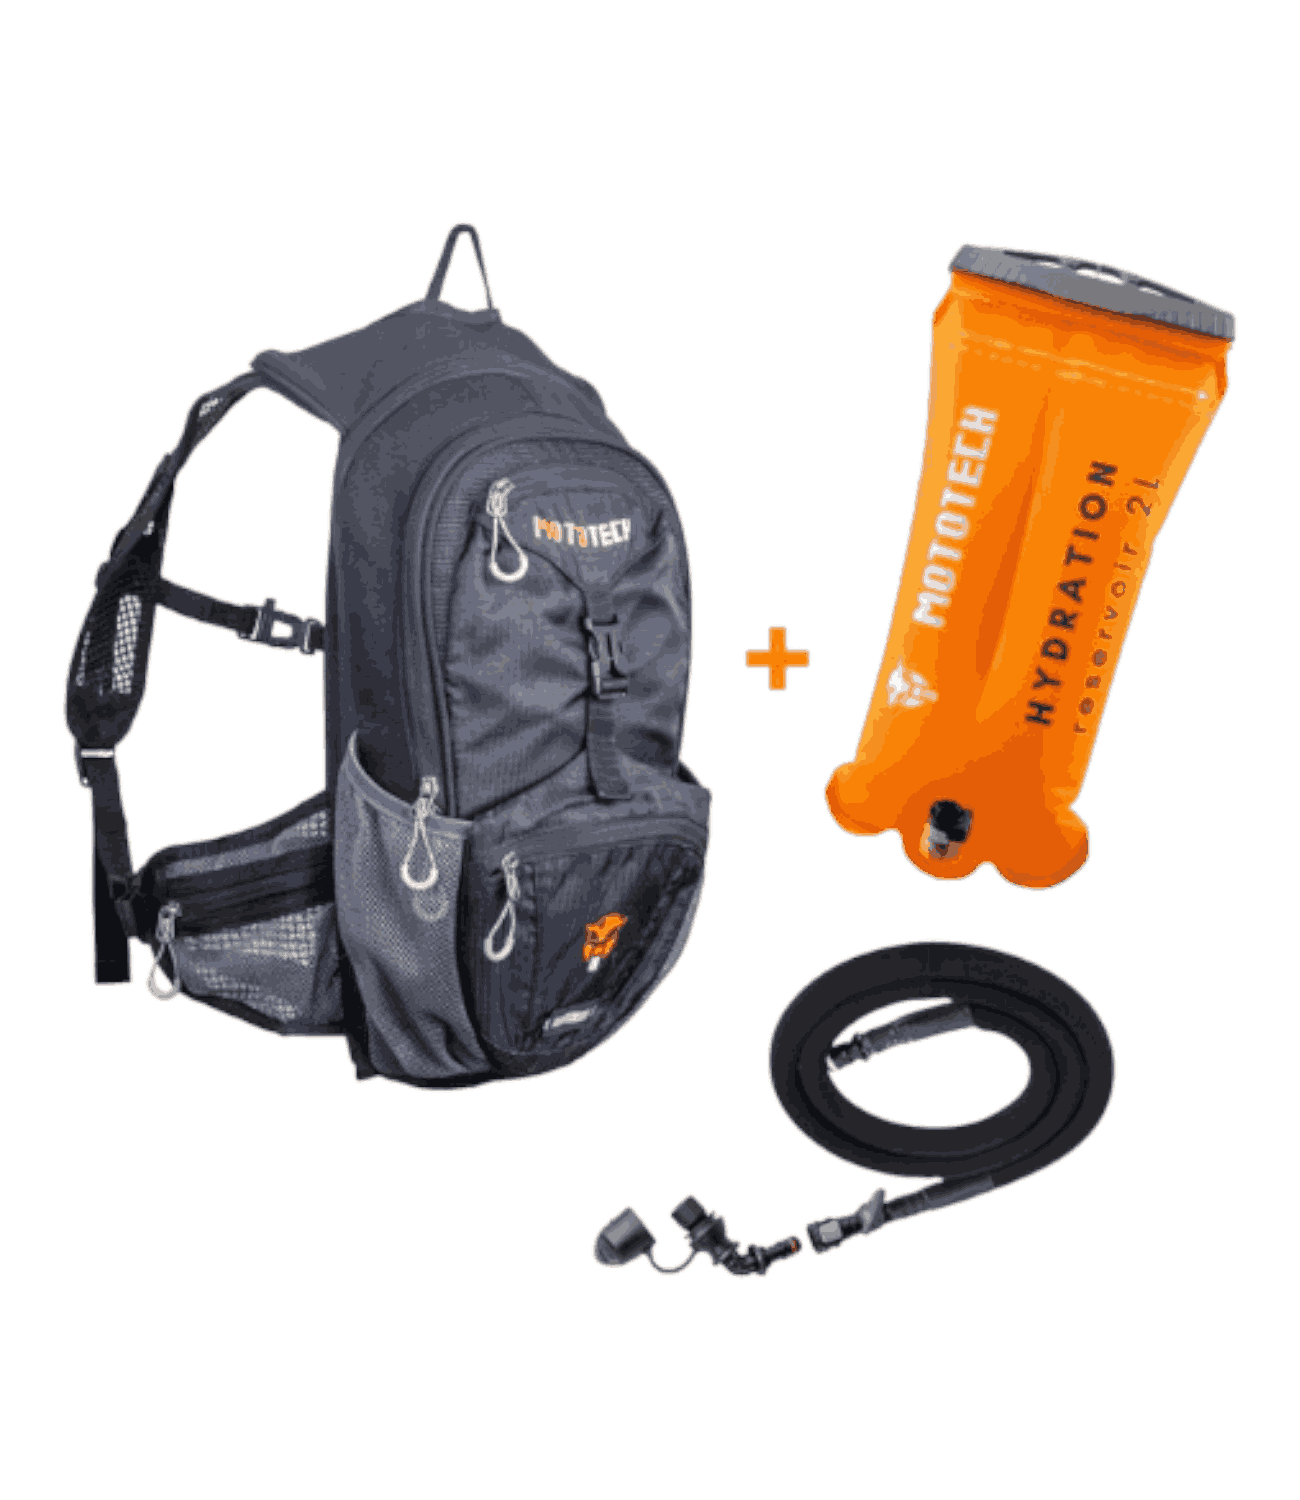 Mototech Hydration Reservoir Water Bladder - 2L + Stealth Hydration Backpack - 8L Combo